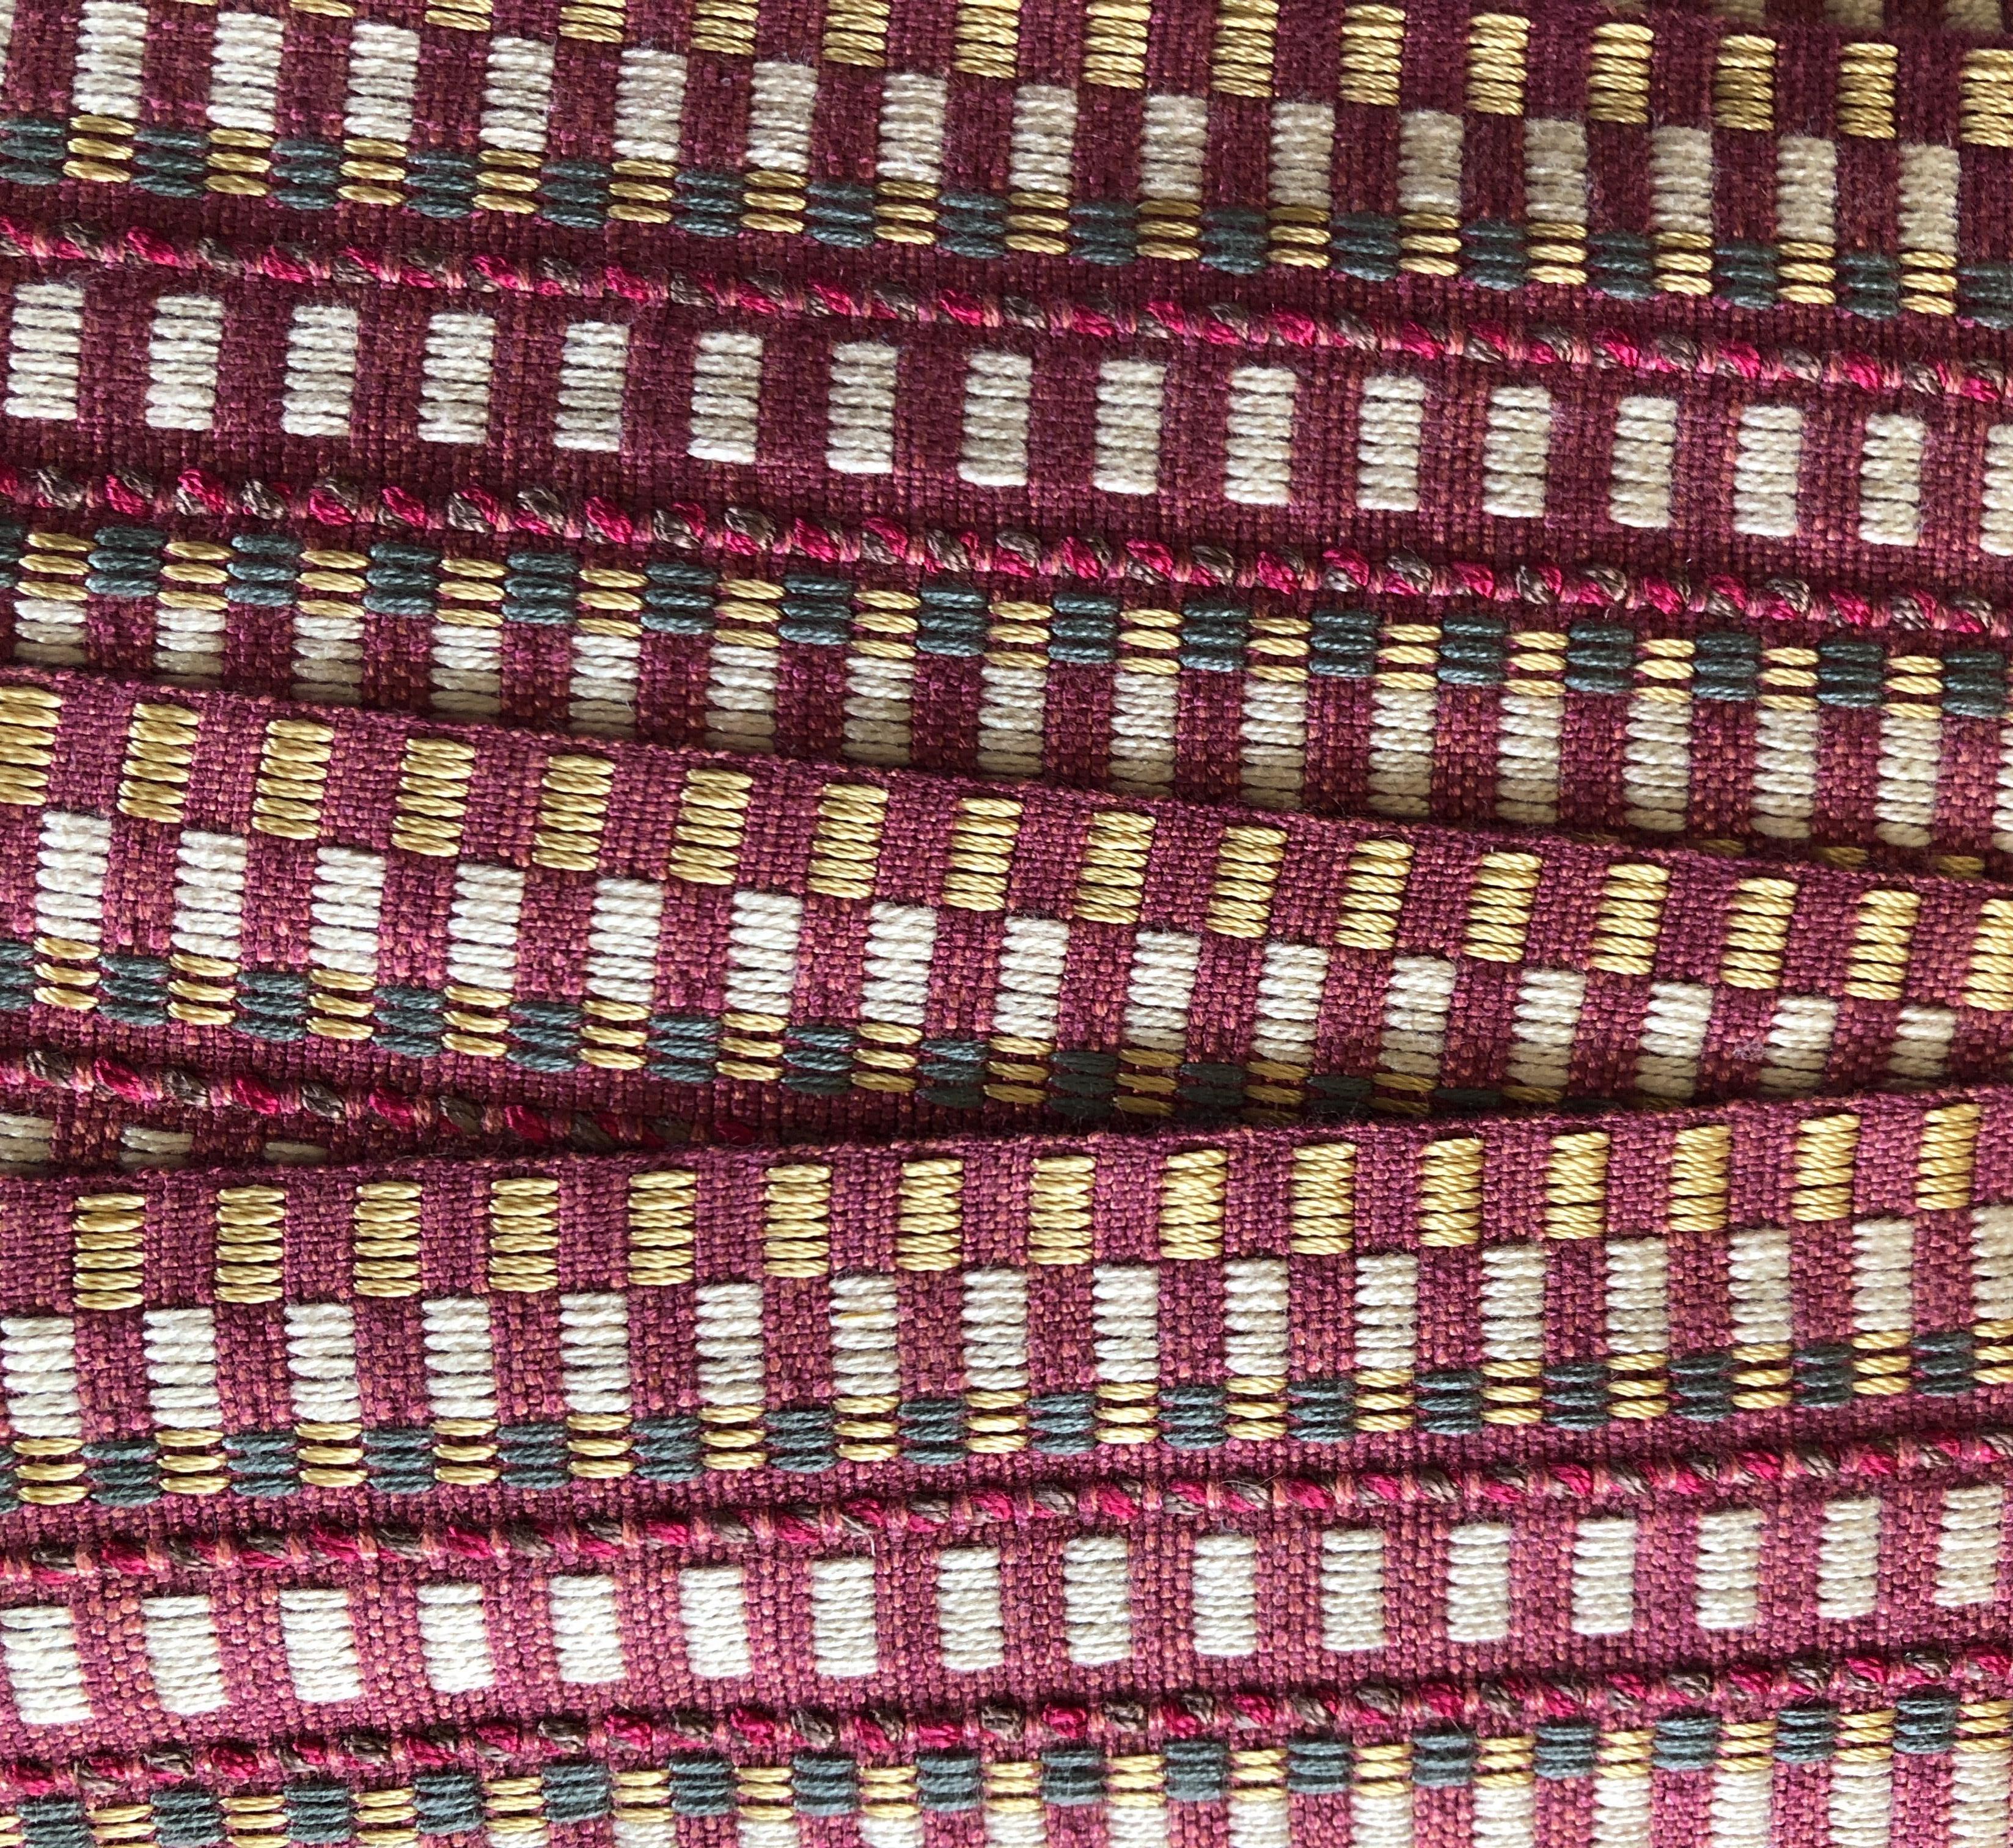 Samuel & Sons red and yellow woven border
Color: Coral/cream/gold
Ideal for pillows, upholstery and curtains.
Size: 15 yards x 2.5